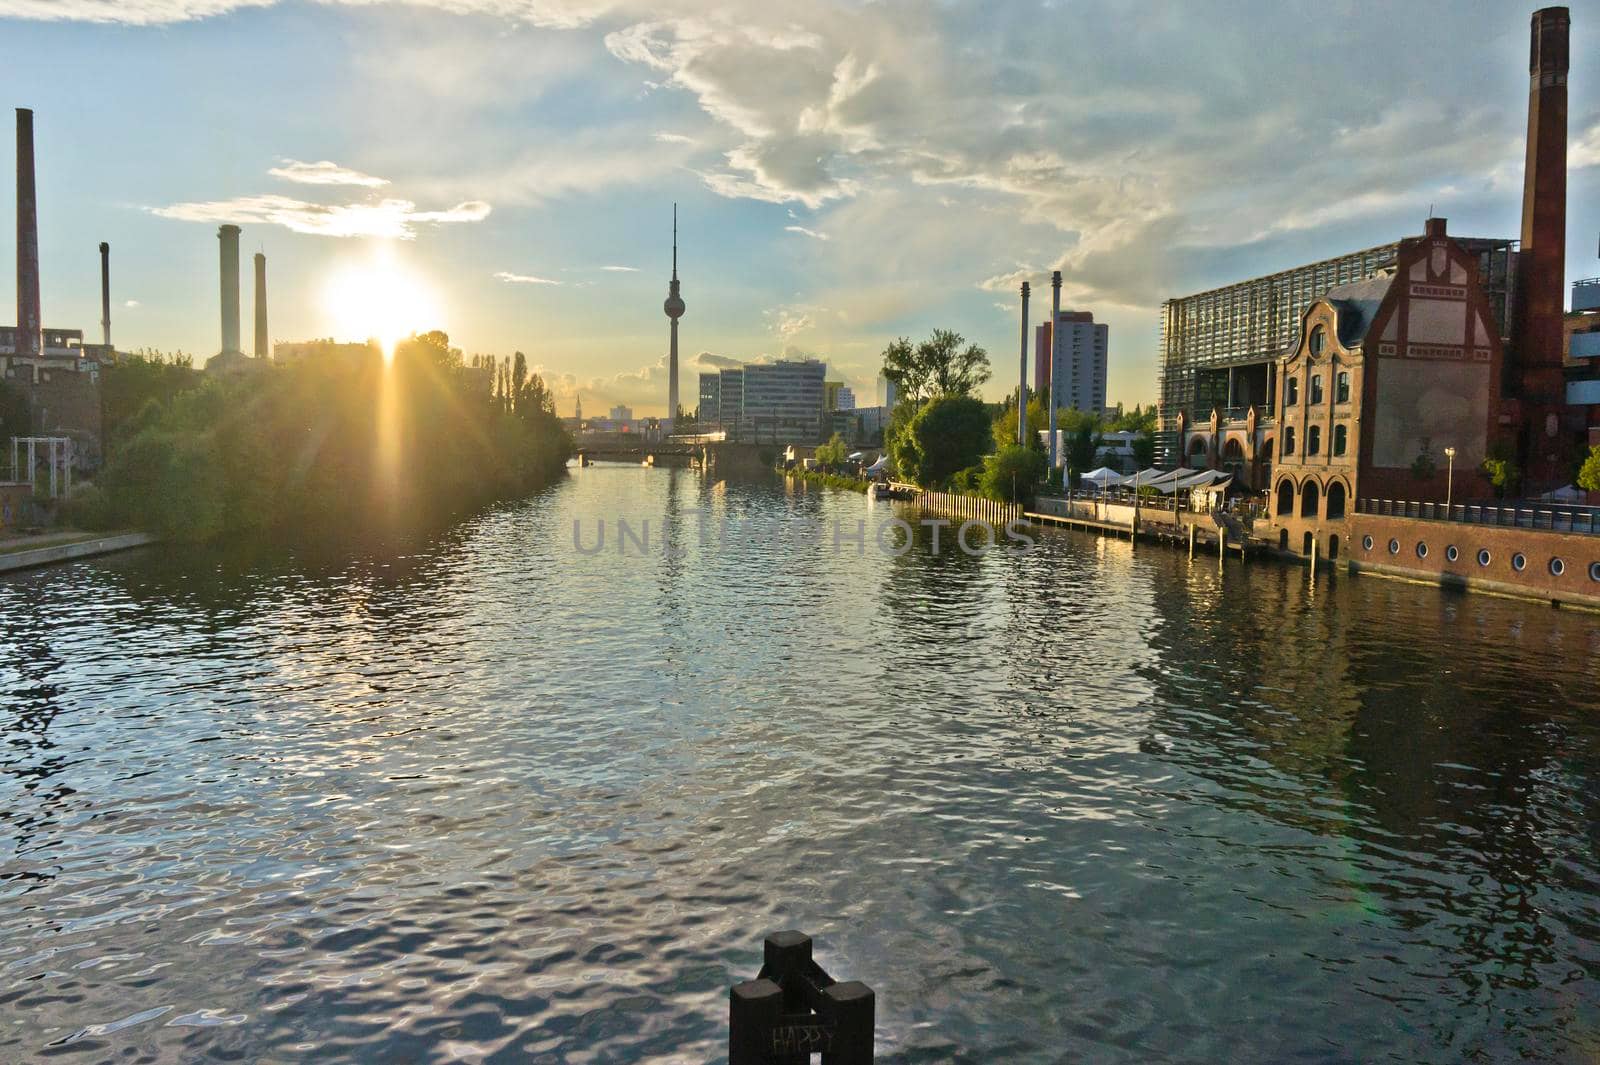 Berlin, Old city sunset view by the river Spree,  Germany, Europe by giannakisphoto